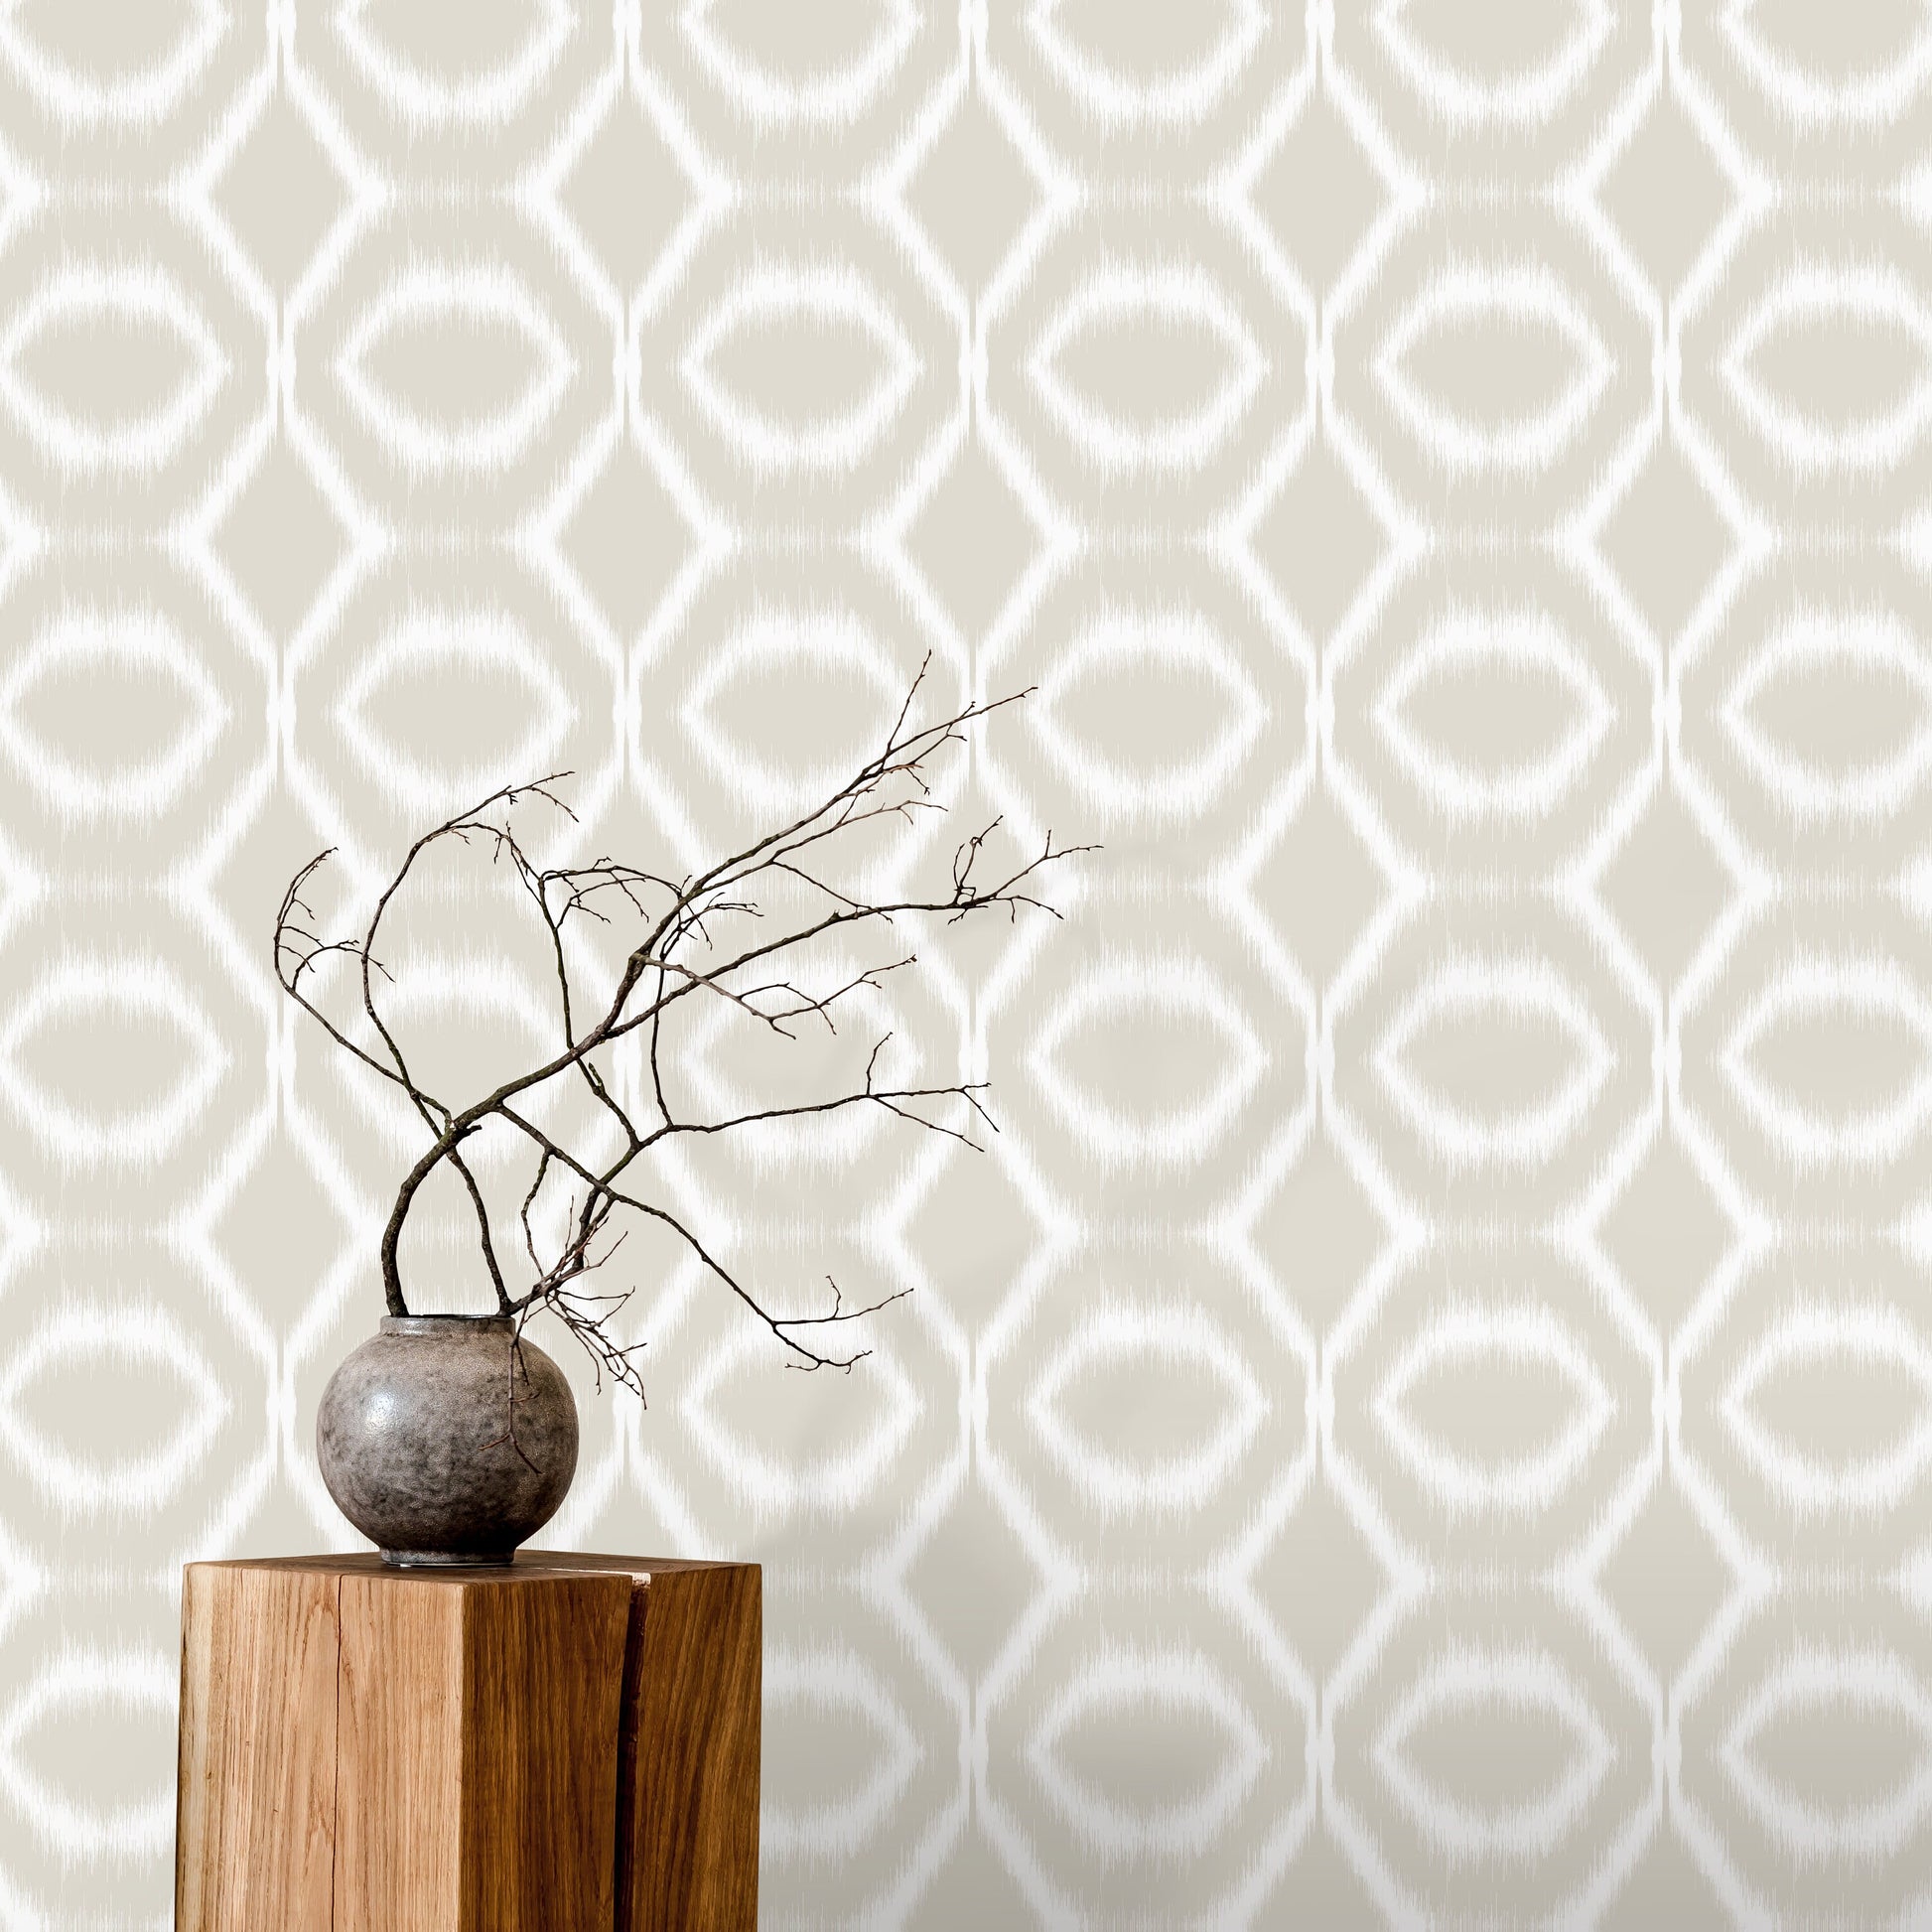 Beige Abstract Mid-Century Wallpaper / Peel and Stick Wallpaper Removable Wallpaper Home Decor Wall Art Wall Decor Room Decor - C747